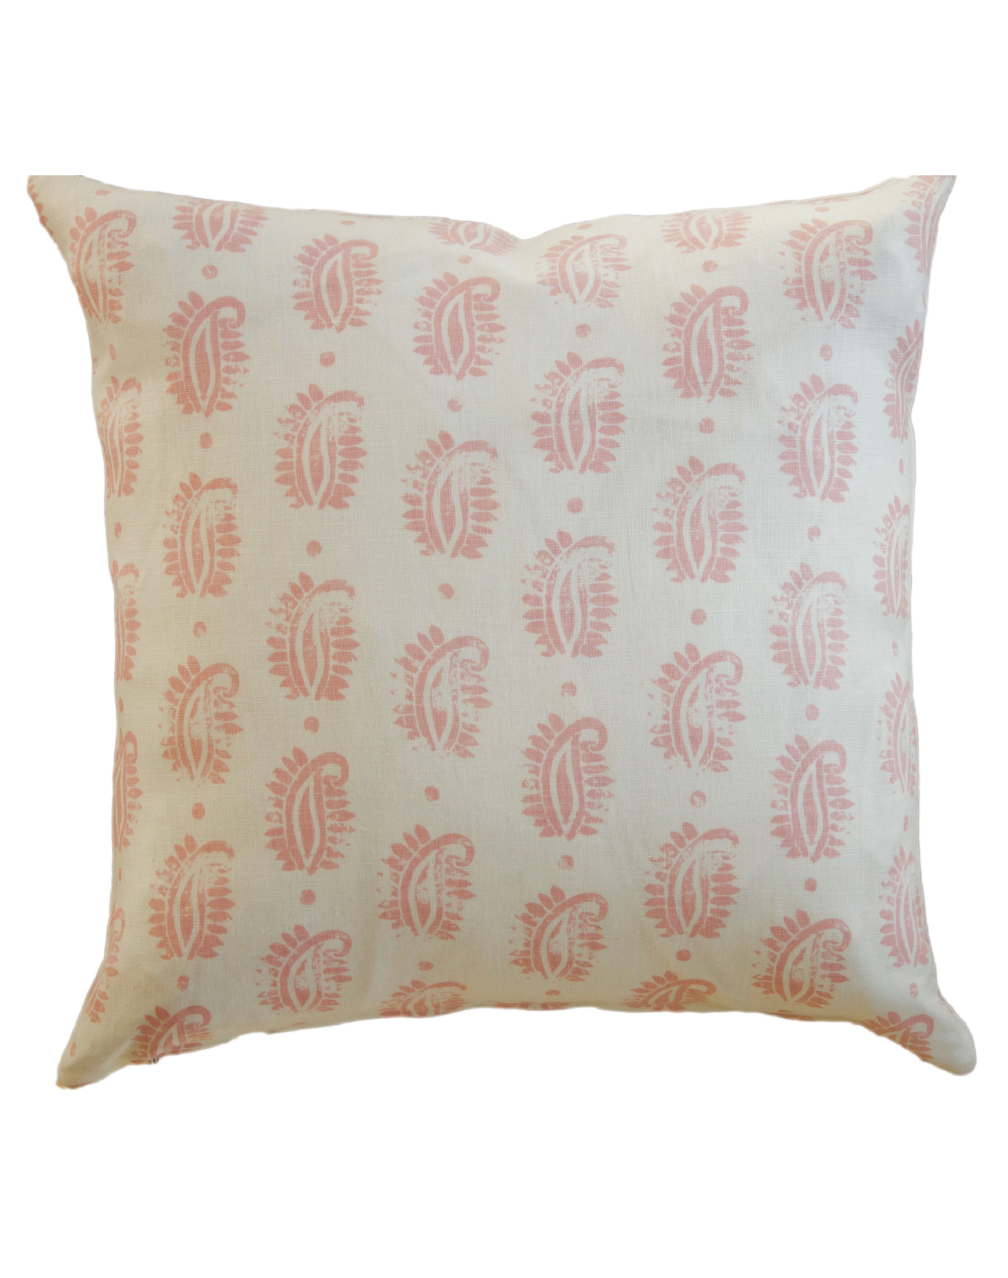 Glass Anatomy Cushion Cover, Vintage Pink